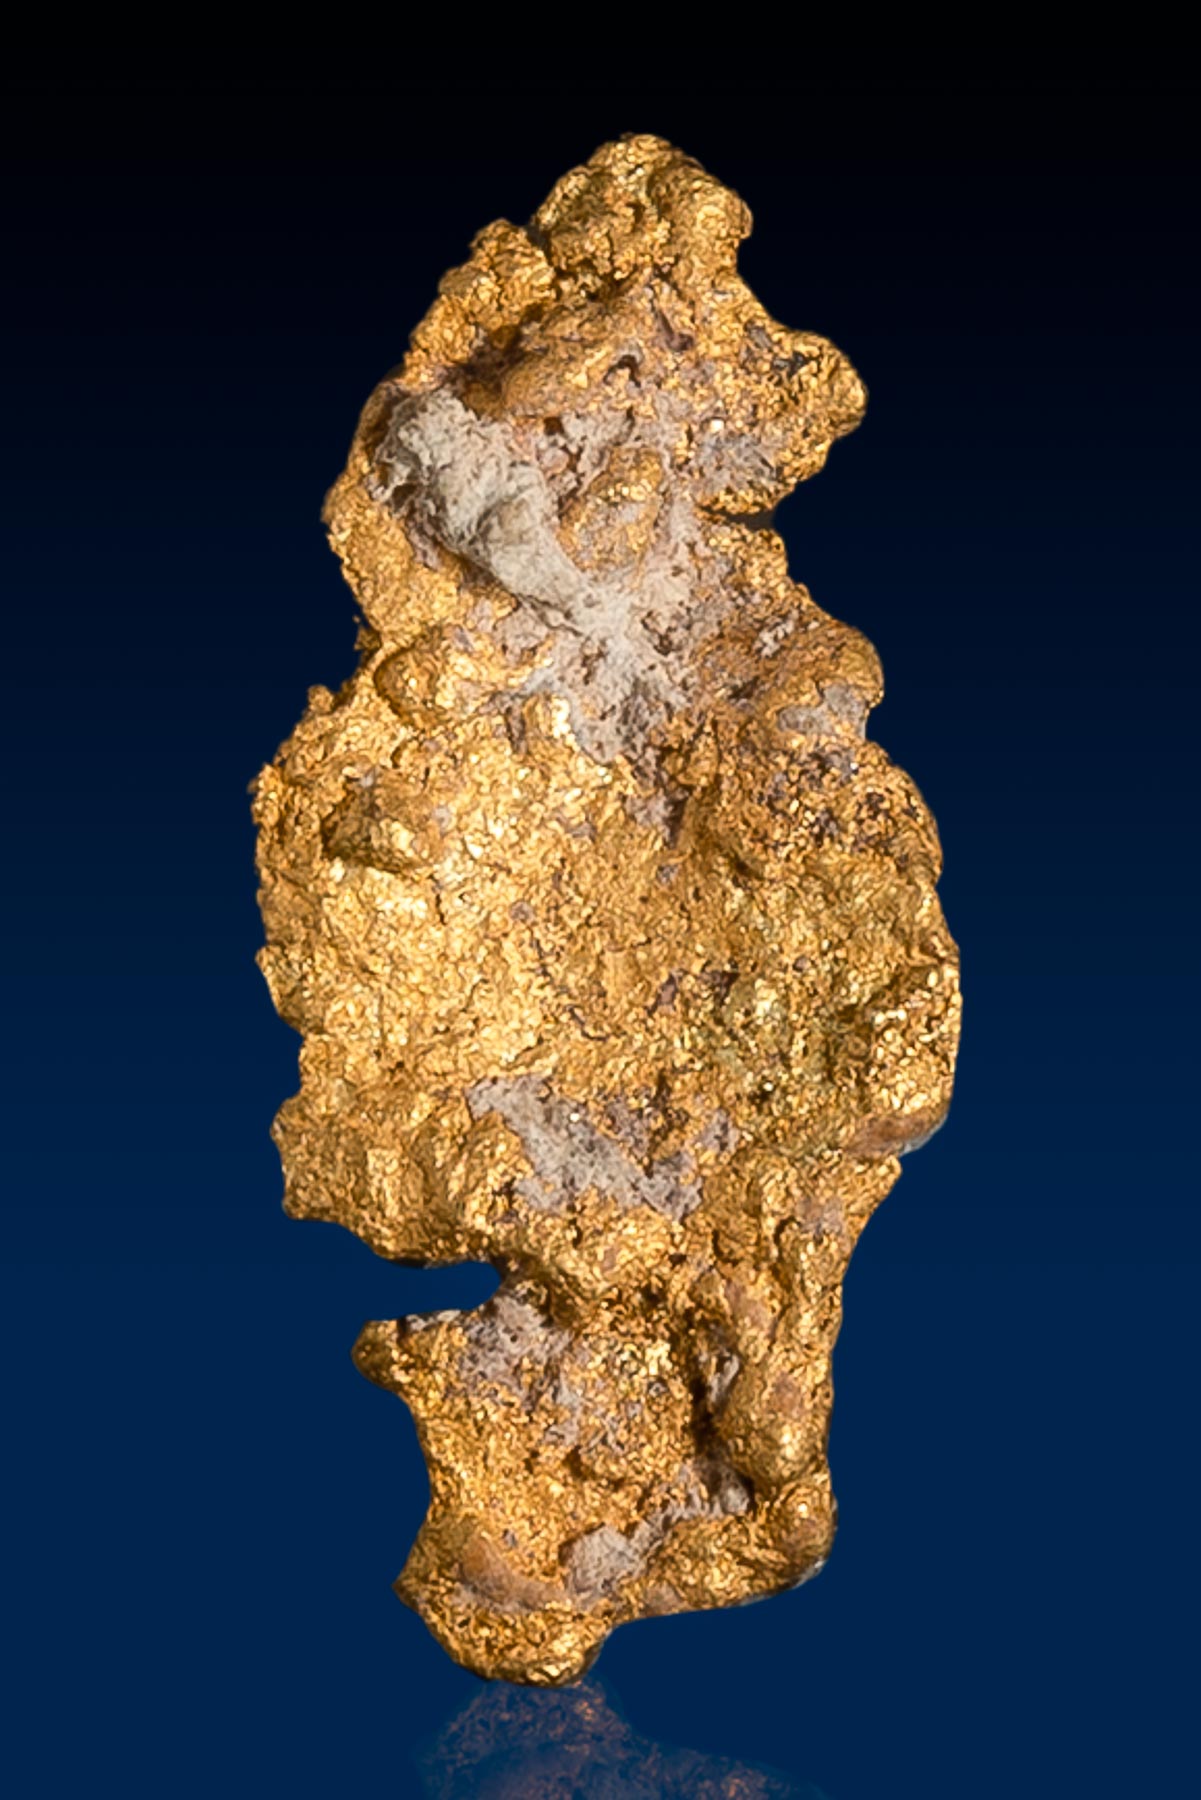 Stones Embedded in Long Arizona Natural Gold Nugget - 1.14 grams